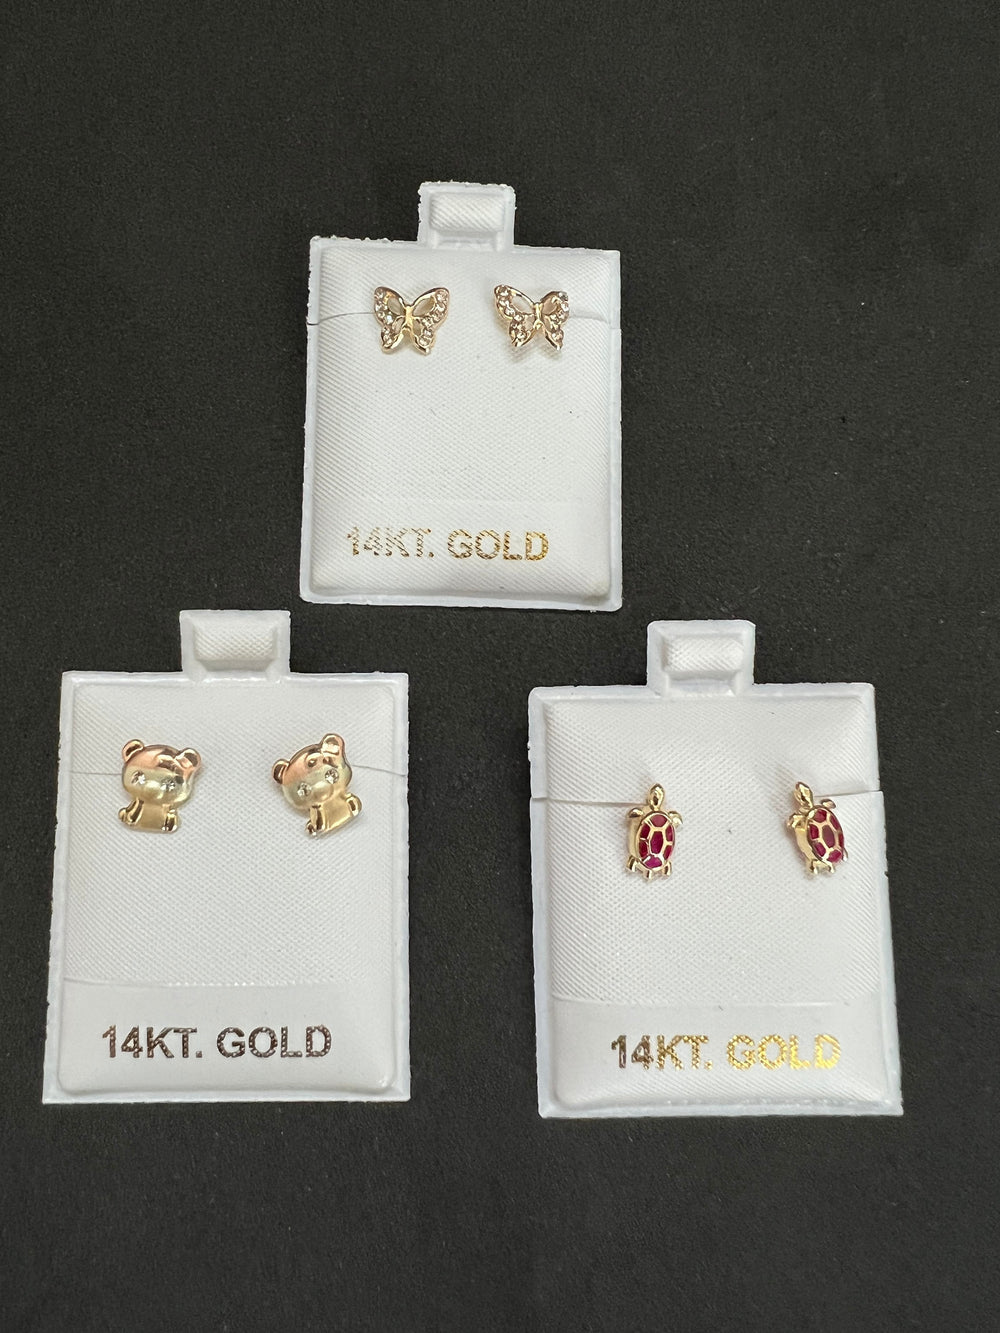 Authentic 14K Gold Screw-back Earrings, Assorted Styles, Elephant, Butterfly, Cross, Turtle, Mother Mary, Teddy Bear, Dolphin